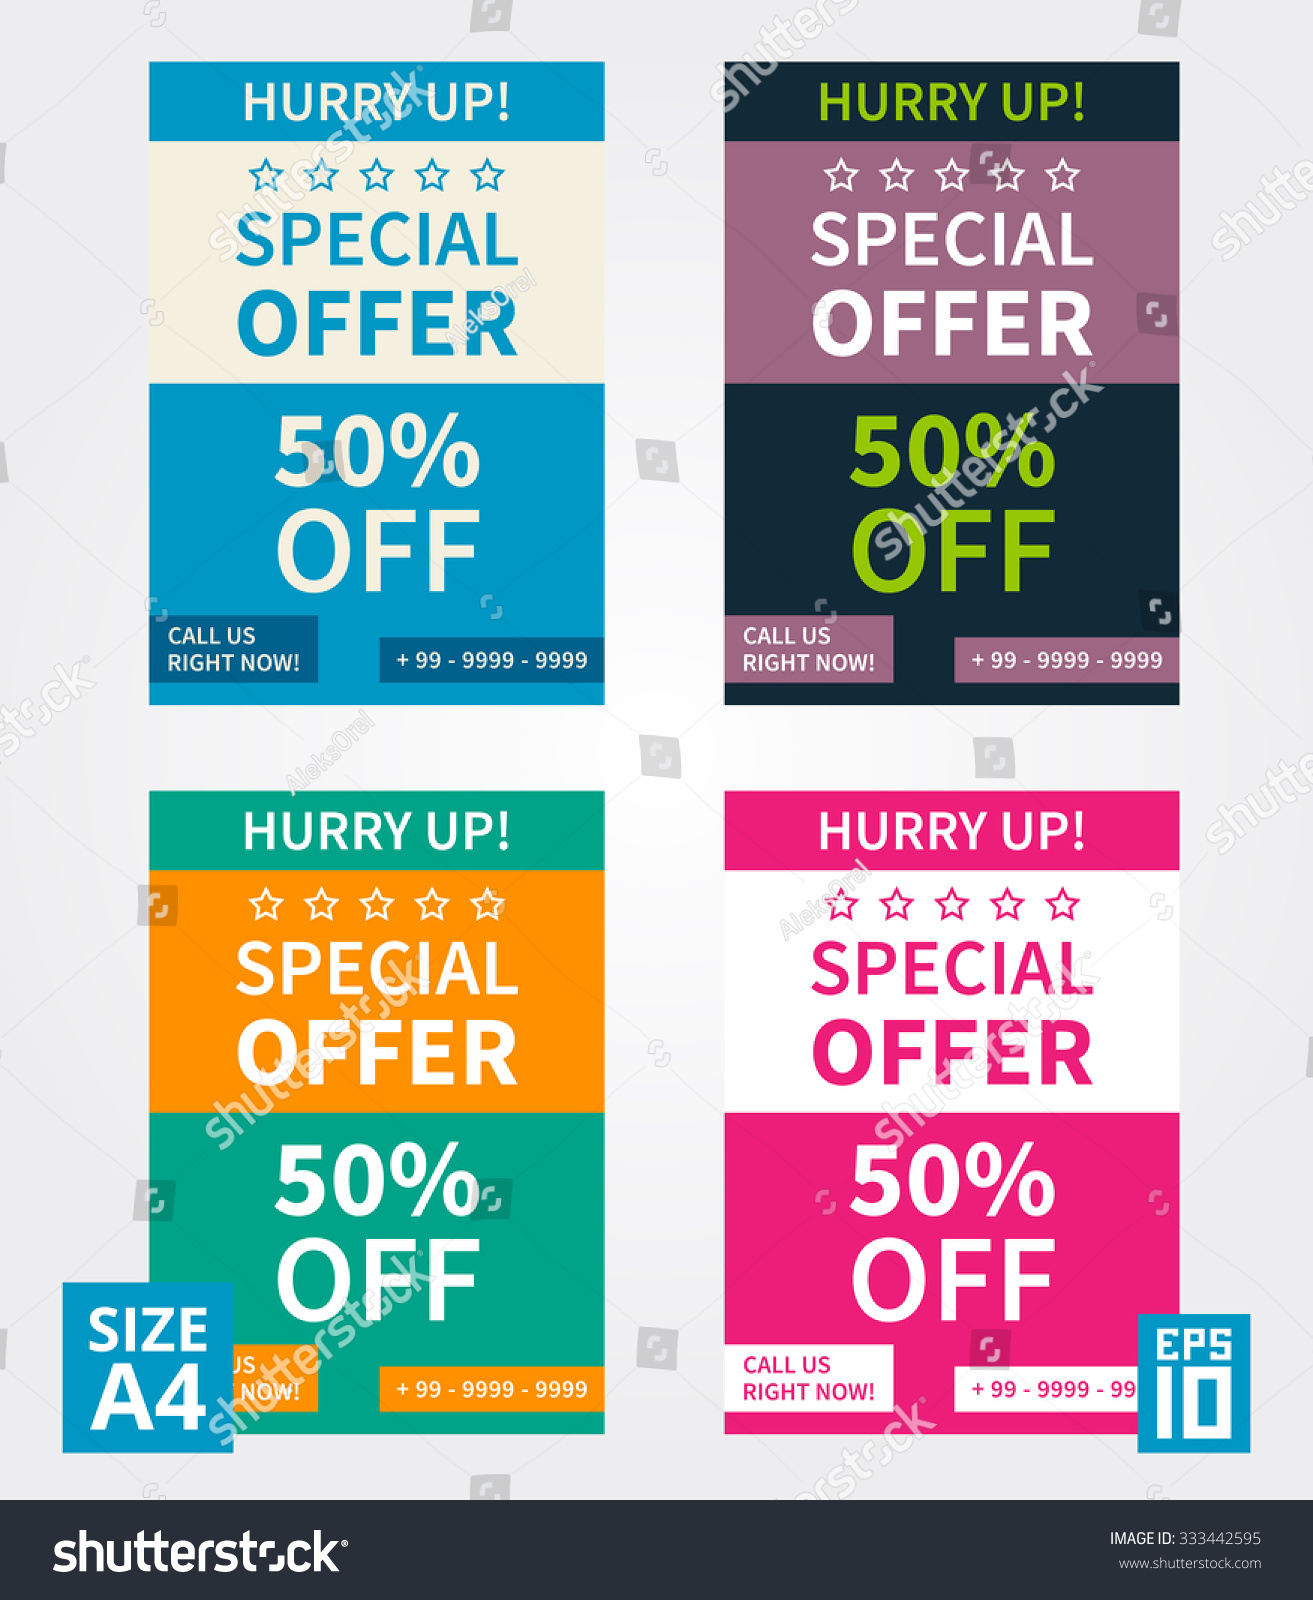 Vector Flyer Design Special Offer Business Stock Vector (Royalty Free ...